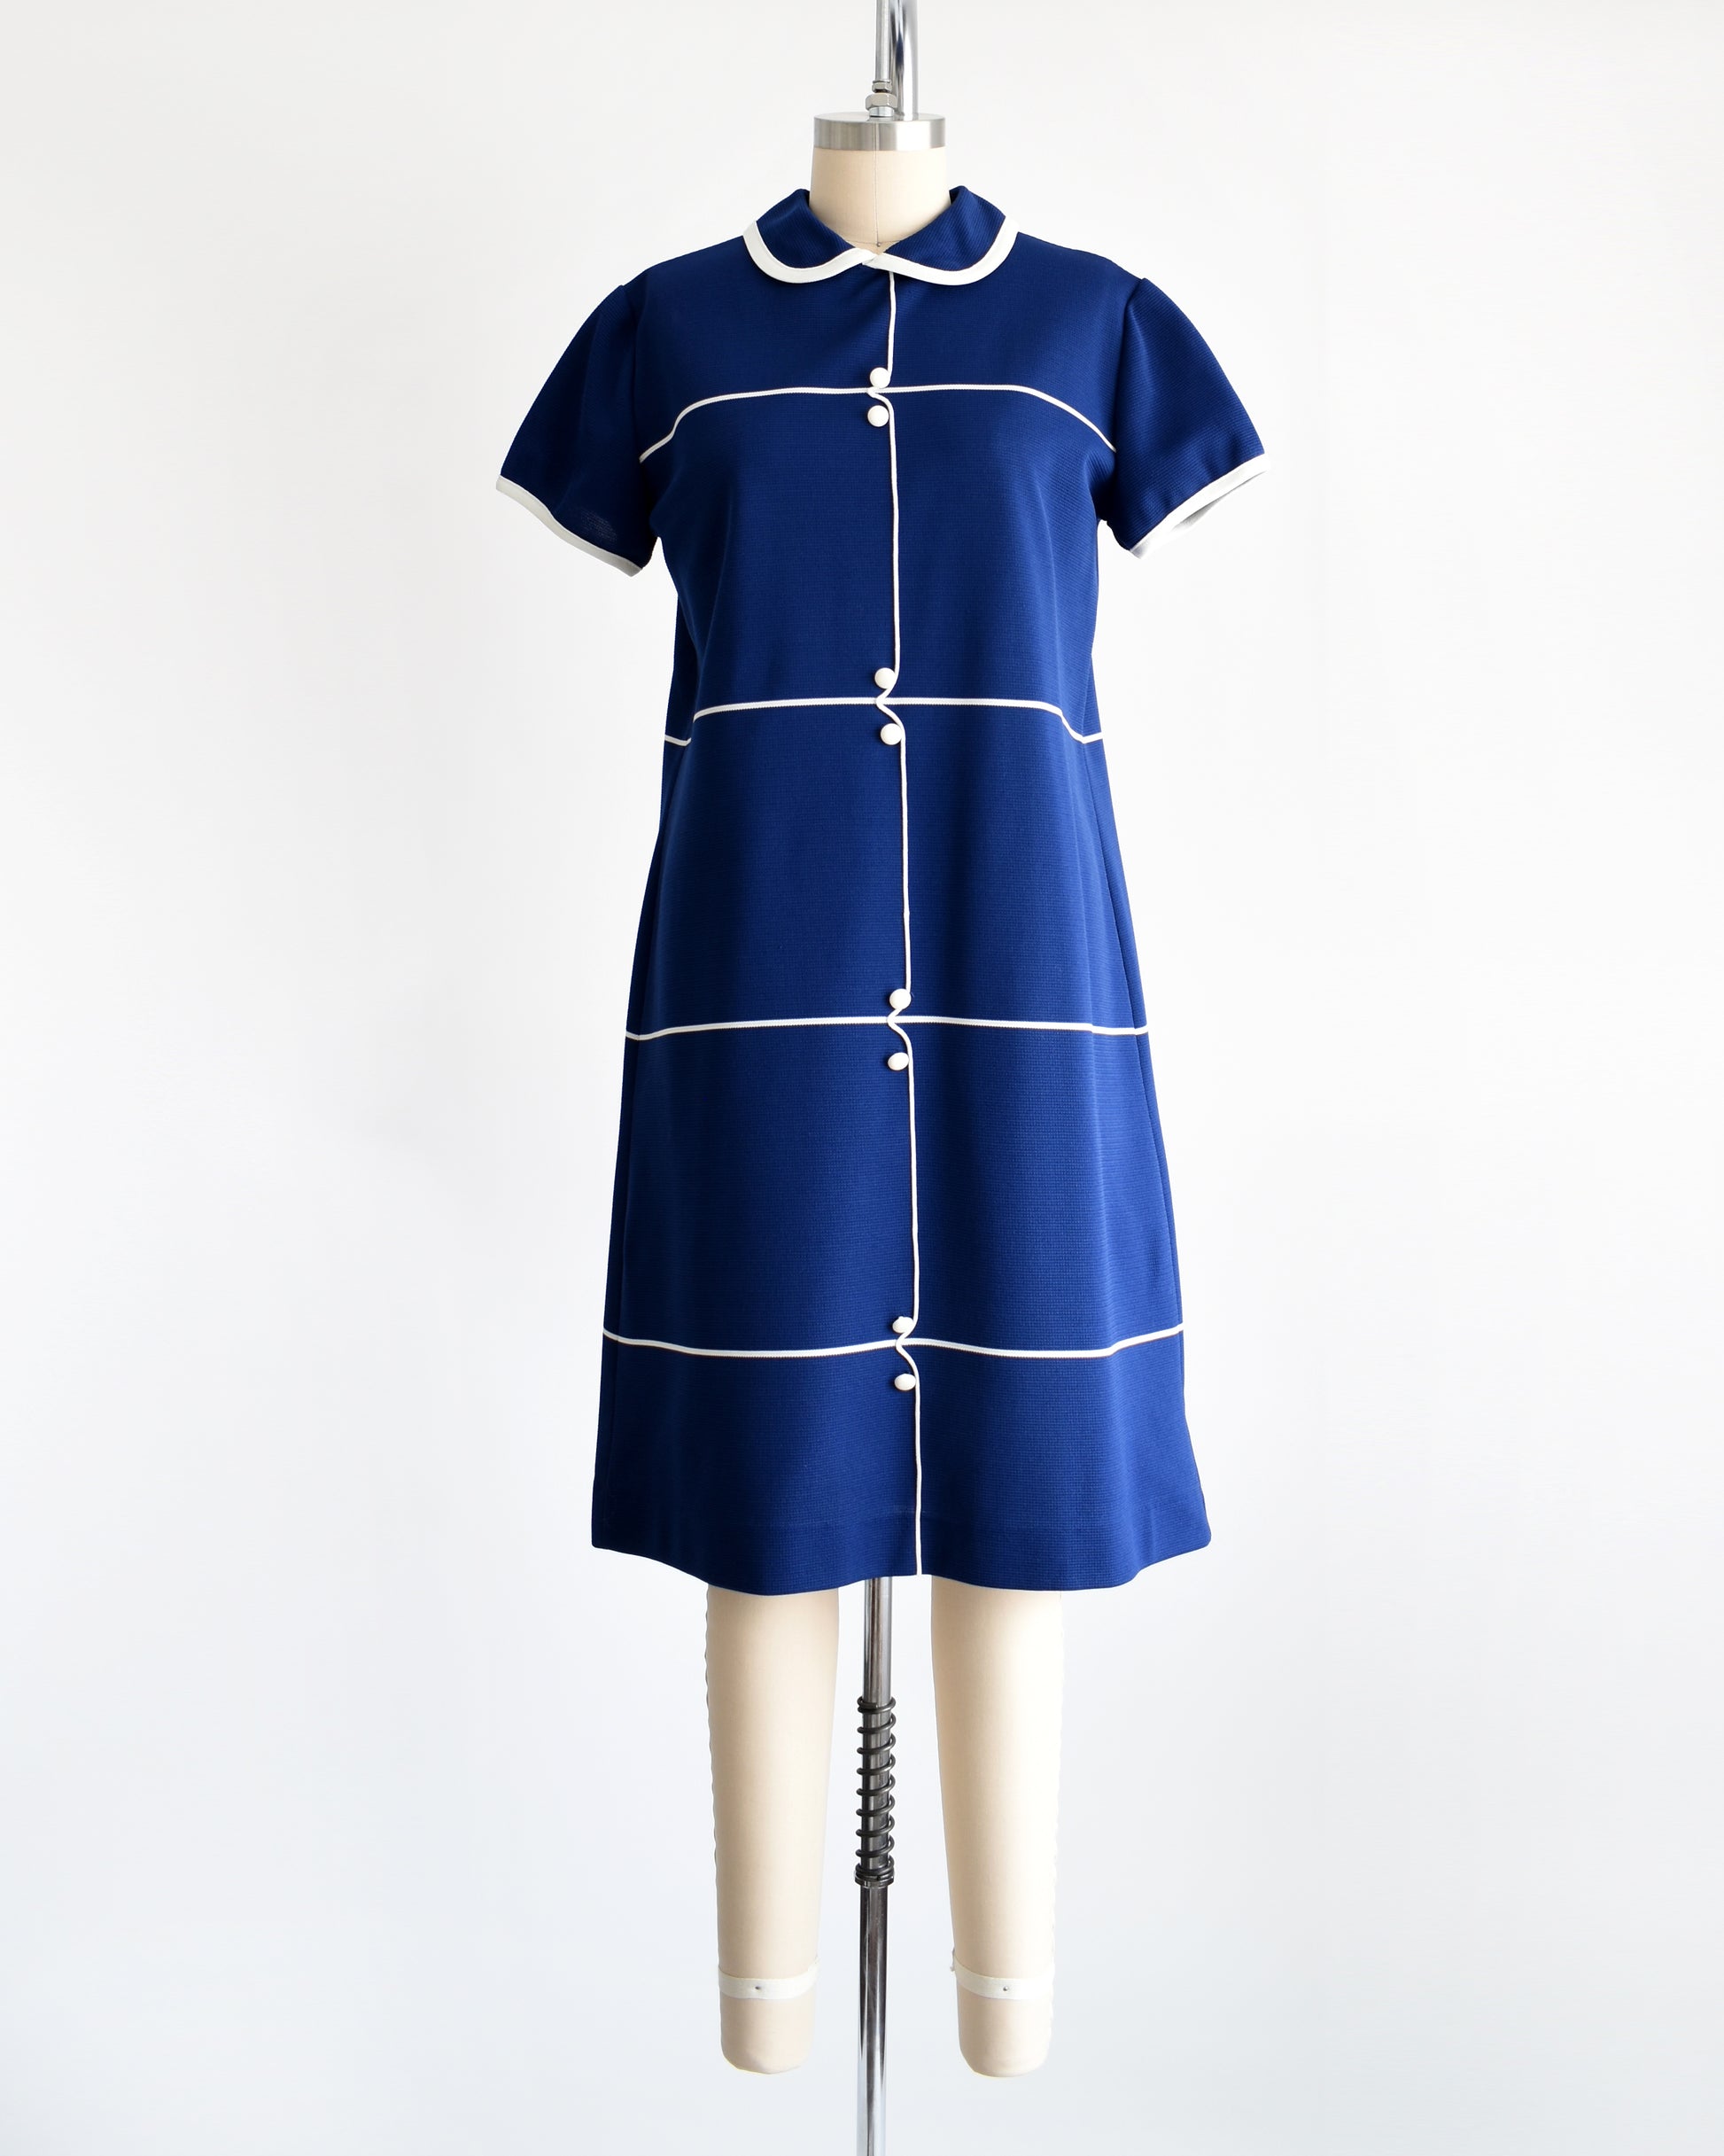 A vintage 1960s navy blue dress with horizontal white stripes, along with a stripe down the front with decorative button accents.